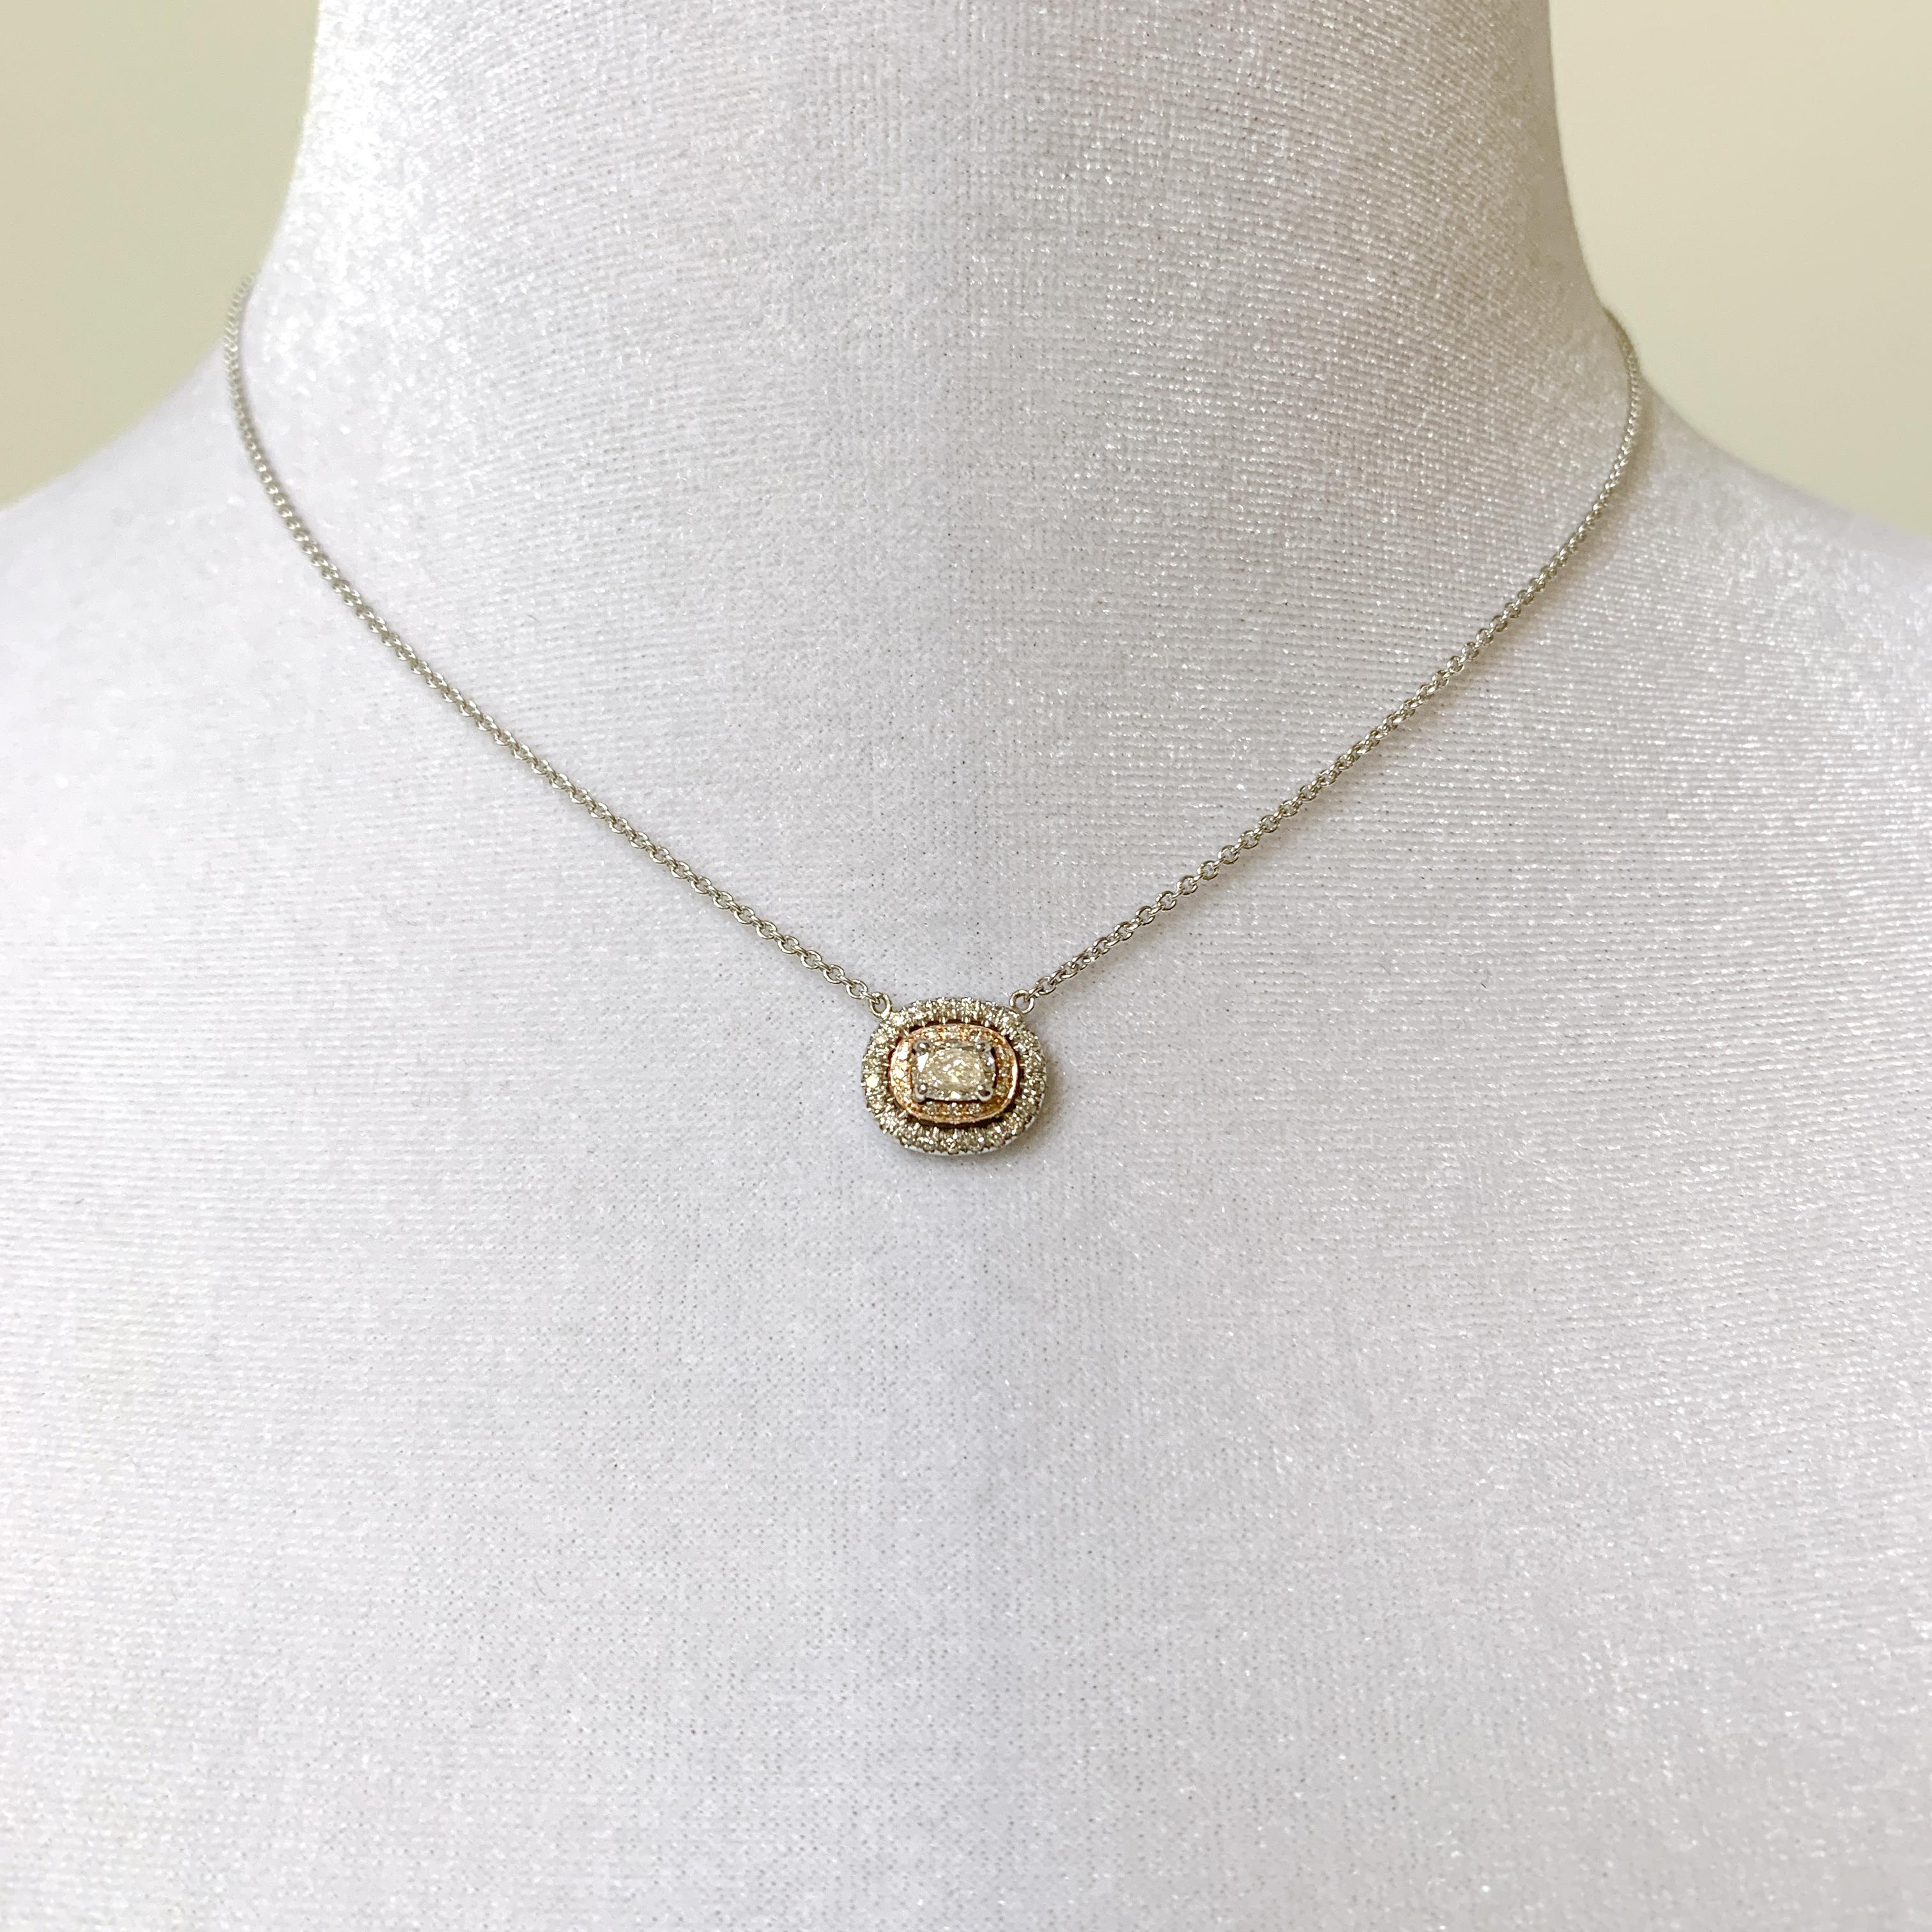 This double halo design is one Eytan Brandes has used for many an engagement ring, but it also makes for an elegant little pendant -- a piece you can wear everyday but which conveys a more elevated interpretation of the word 